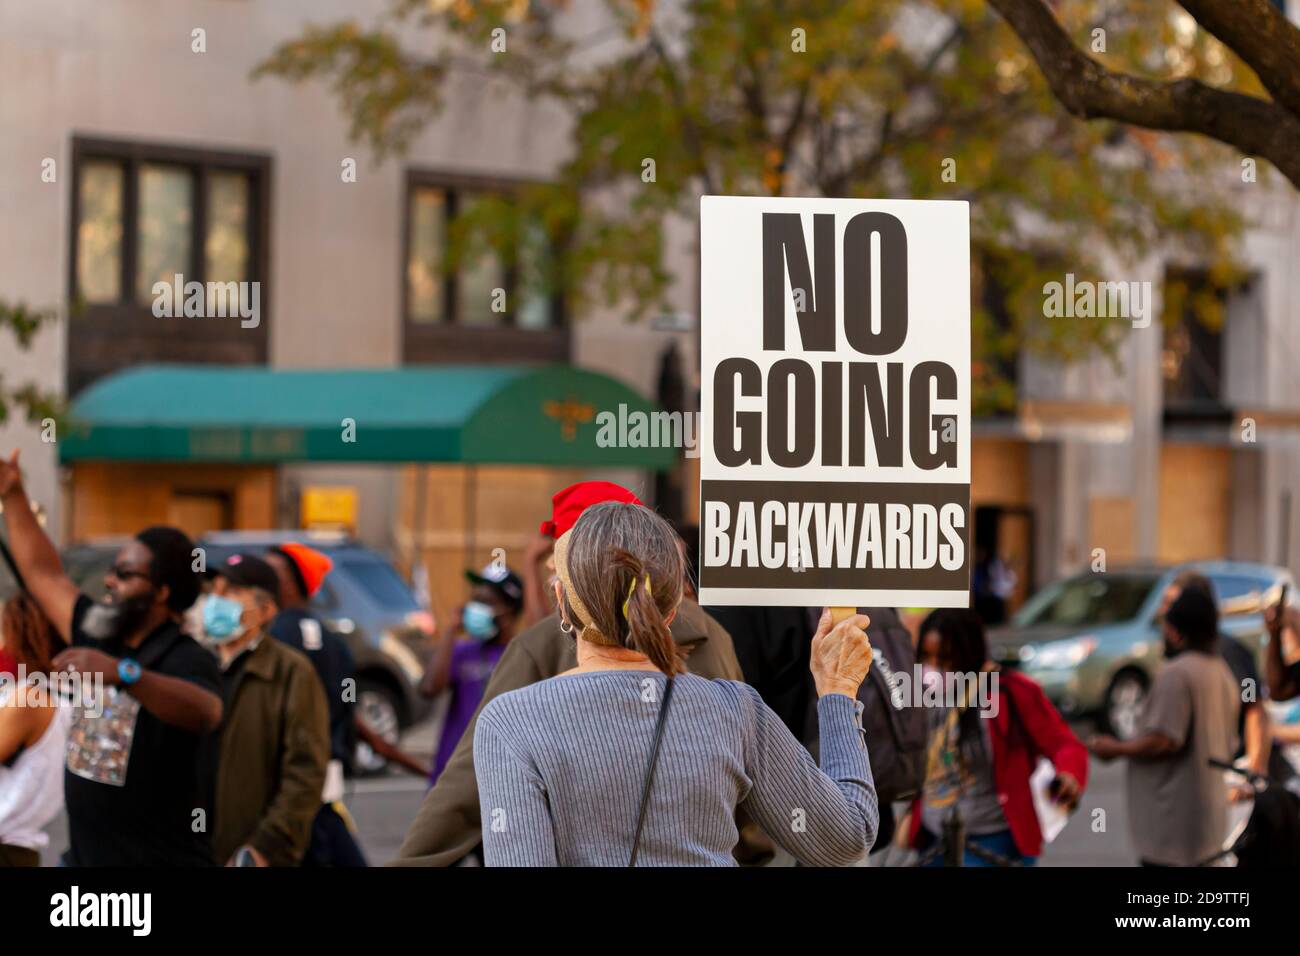 Washington DC, USA 11/06/2020: A woman protester is raising a banner that says: 'No Going Backwards'. Image taken at an Anti-Trump protest near White Stock Photo